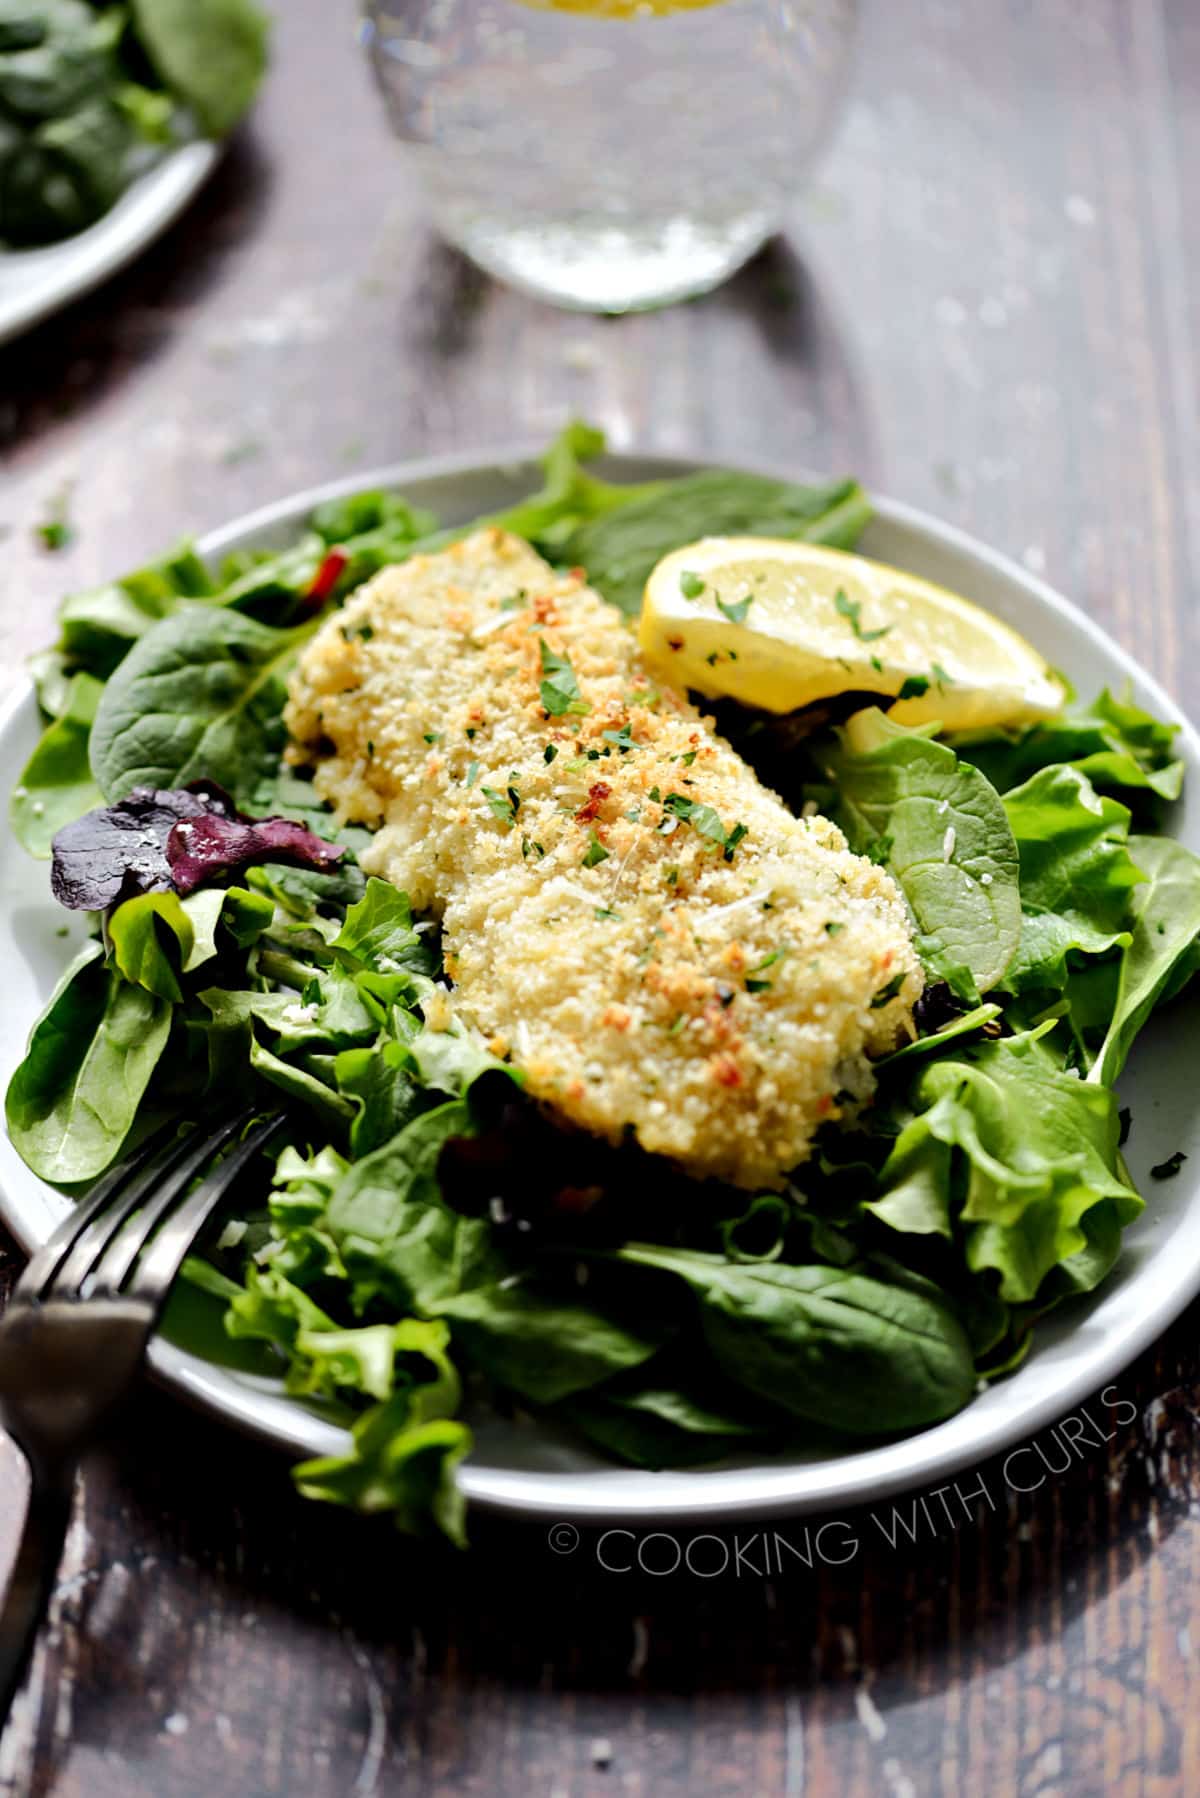 Oven Baked Cod with Panko Crumbs served on a bed of leafy greens with a lemon wedge on the side and sparking water with lemon in the background.